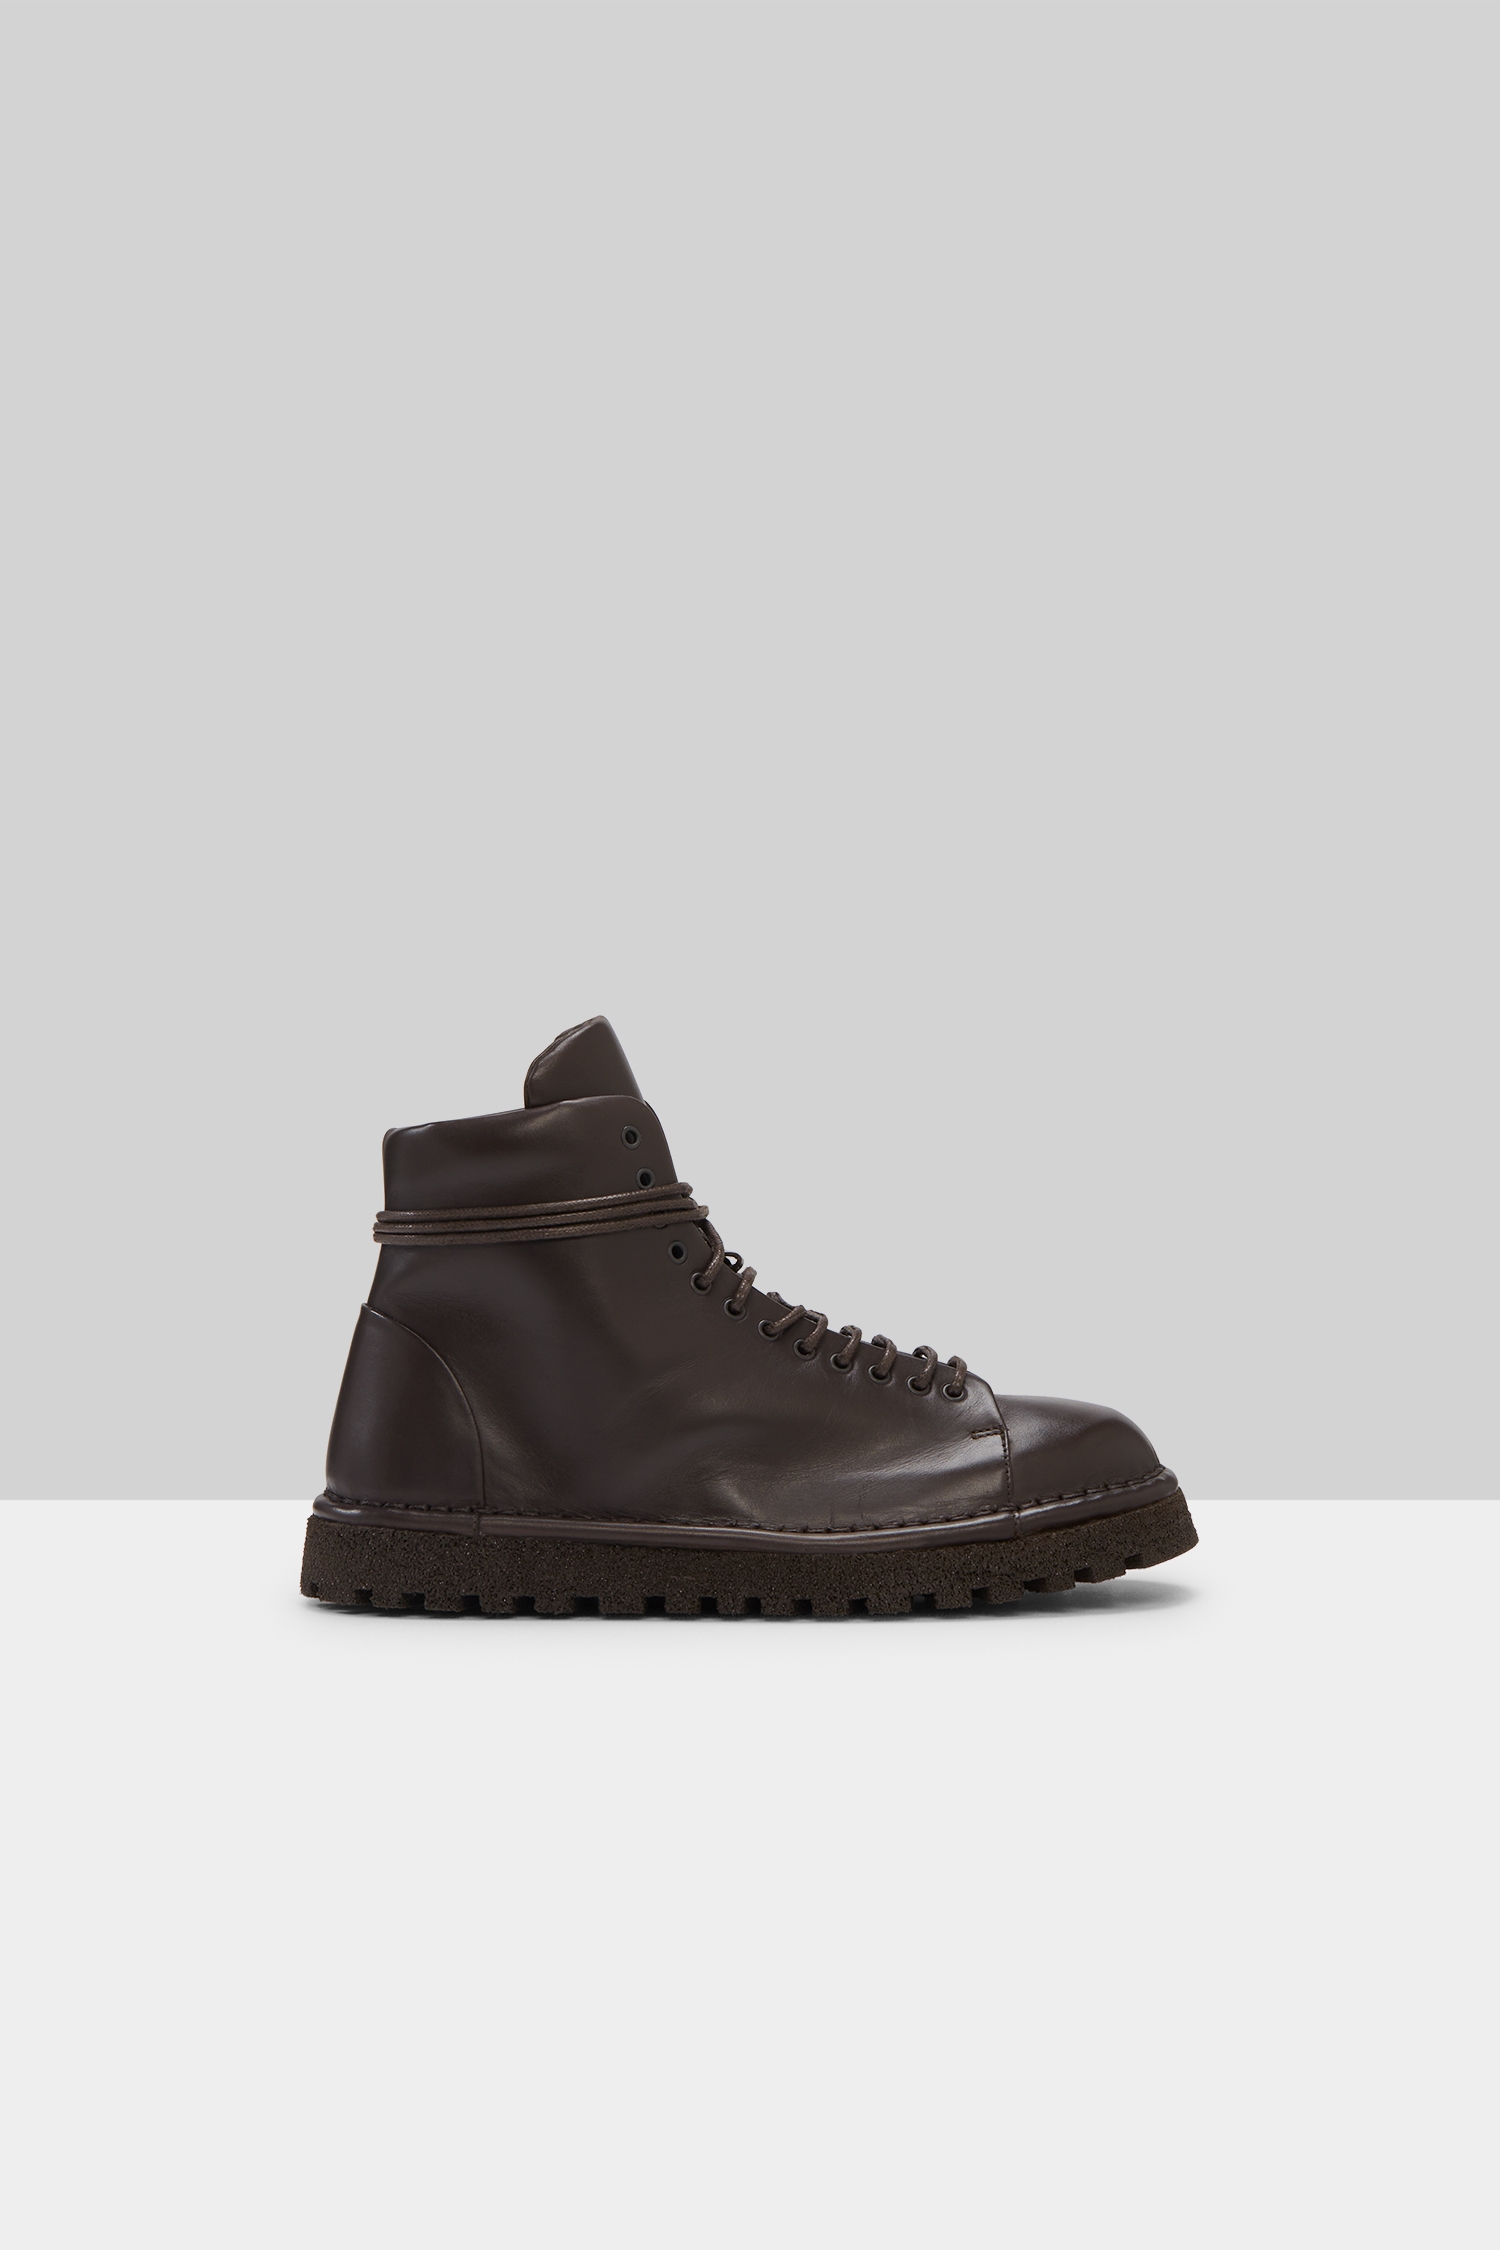 Pallottola Pomice Lace Up Ankle Boot Dark Brown